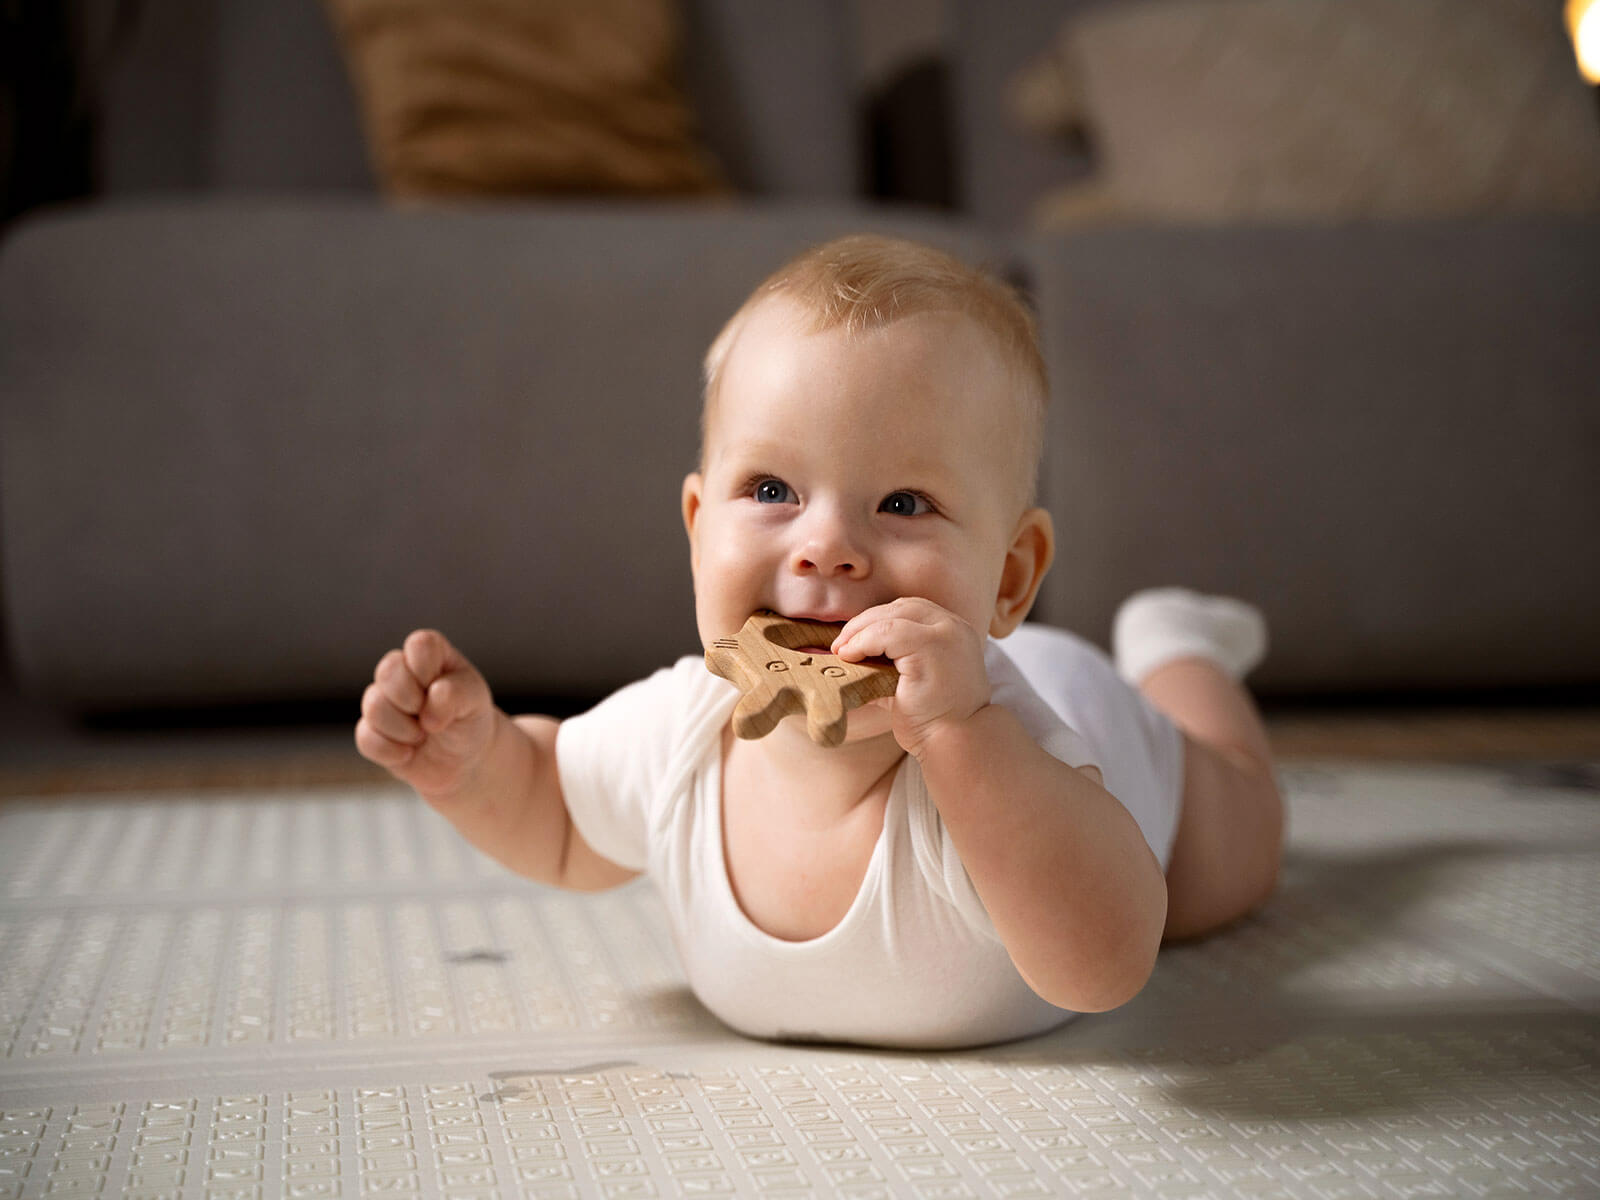 How To Soothe A Teething Baby?